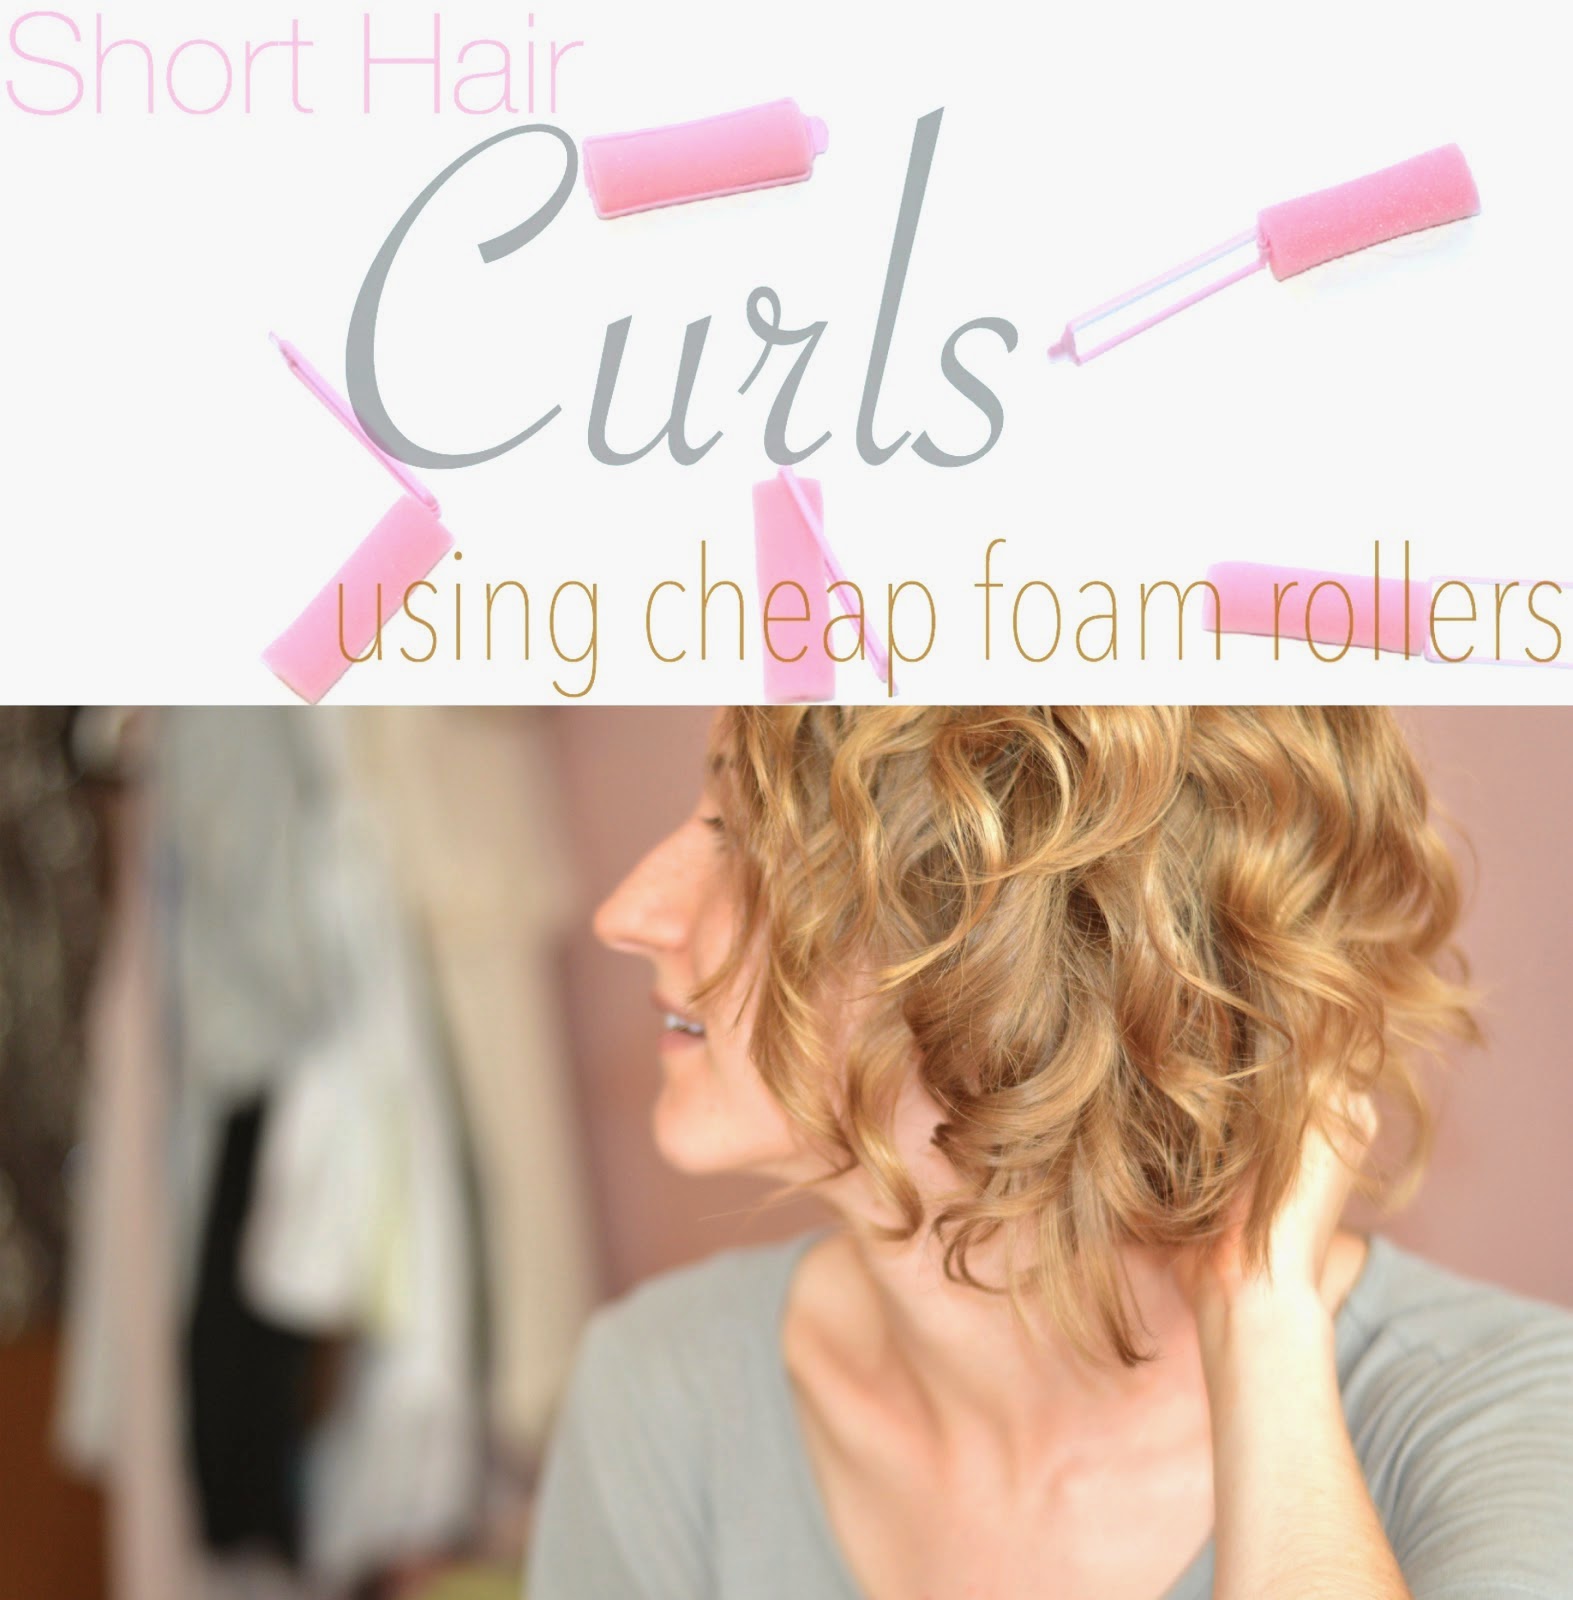 HowTo Curl Short Hair Using Cheap Foam Rollers | Classically Contemporary